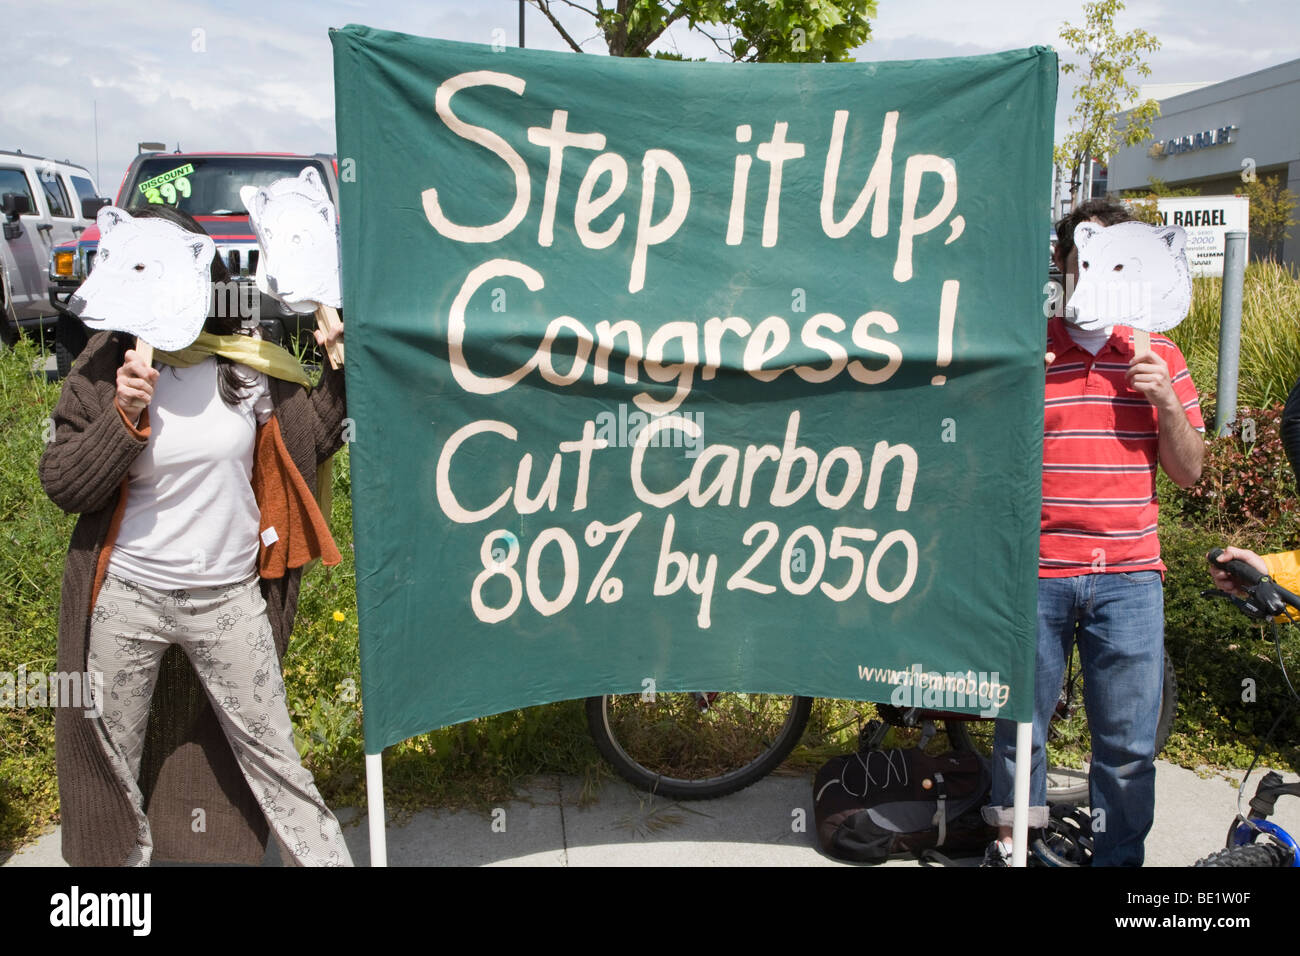 American protesters with polar bear masks holding banner asking Congress to cut carbon emissions 80% by 2050. California, USA Stock Photo